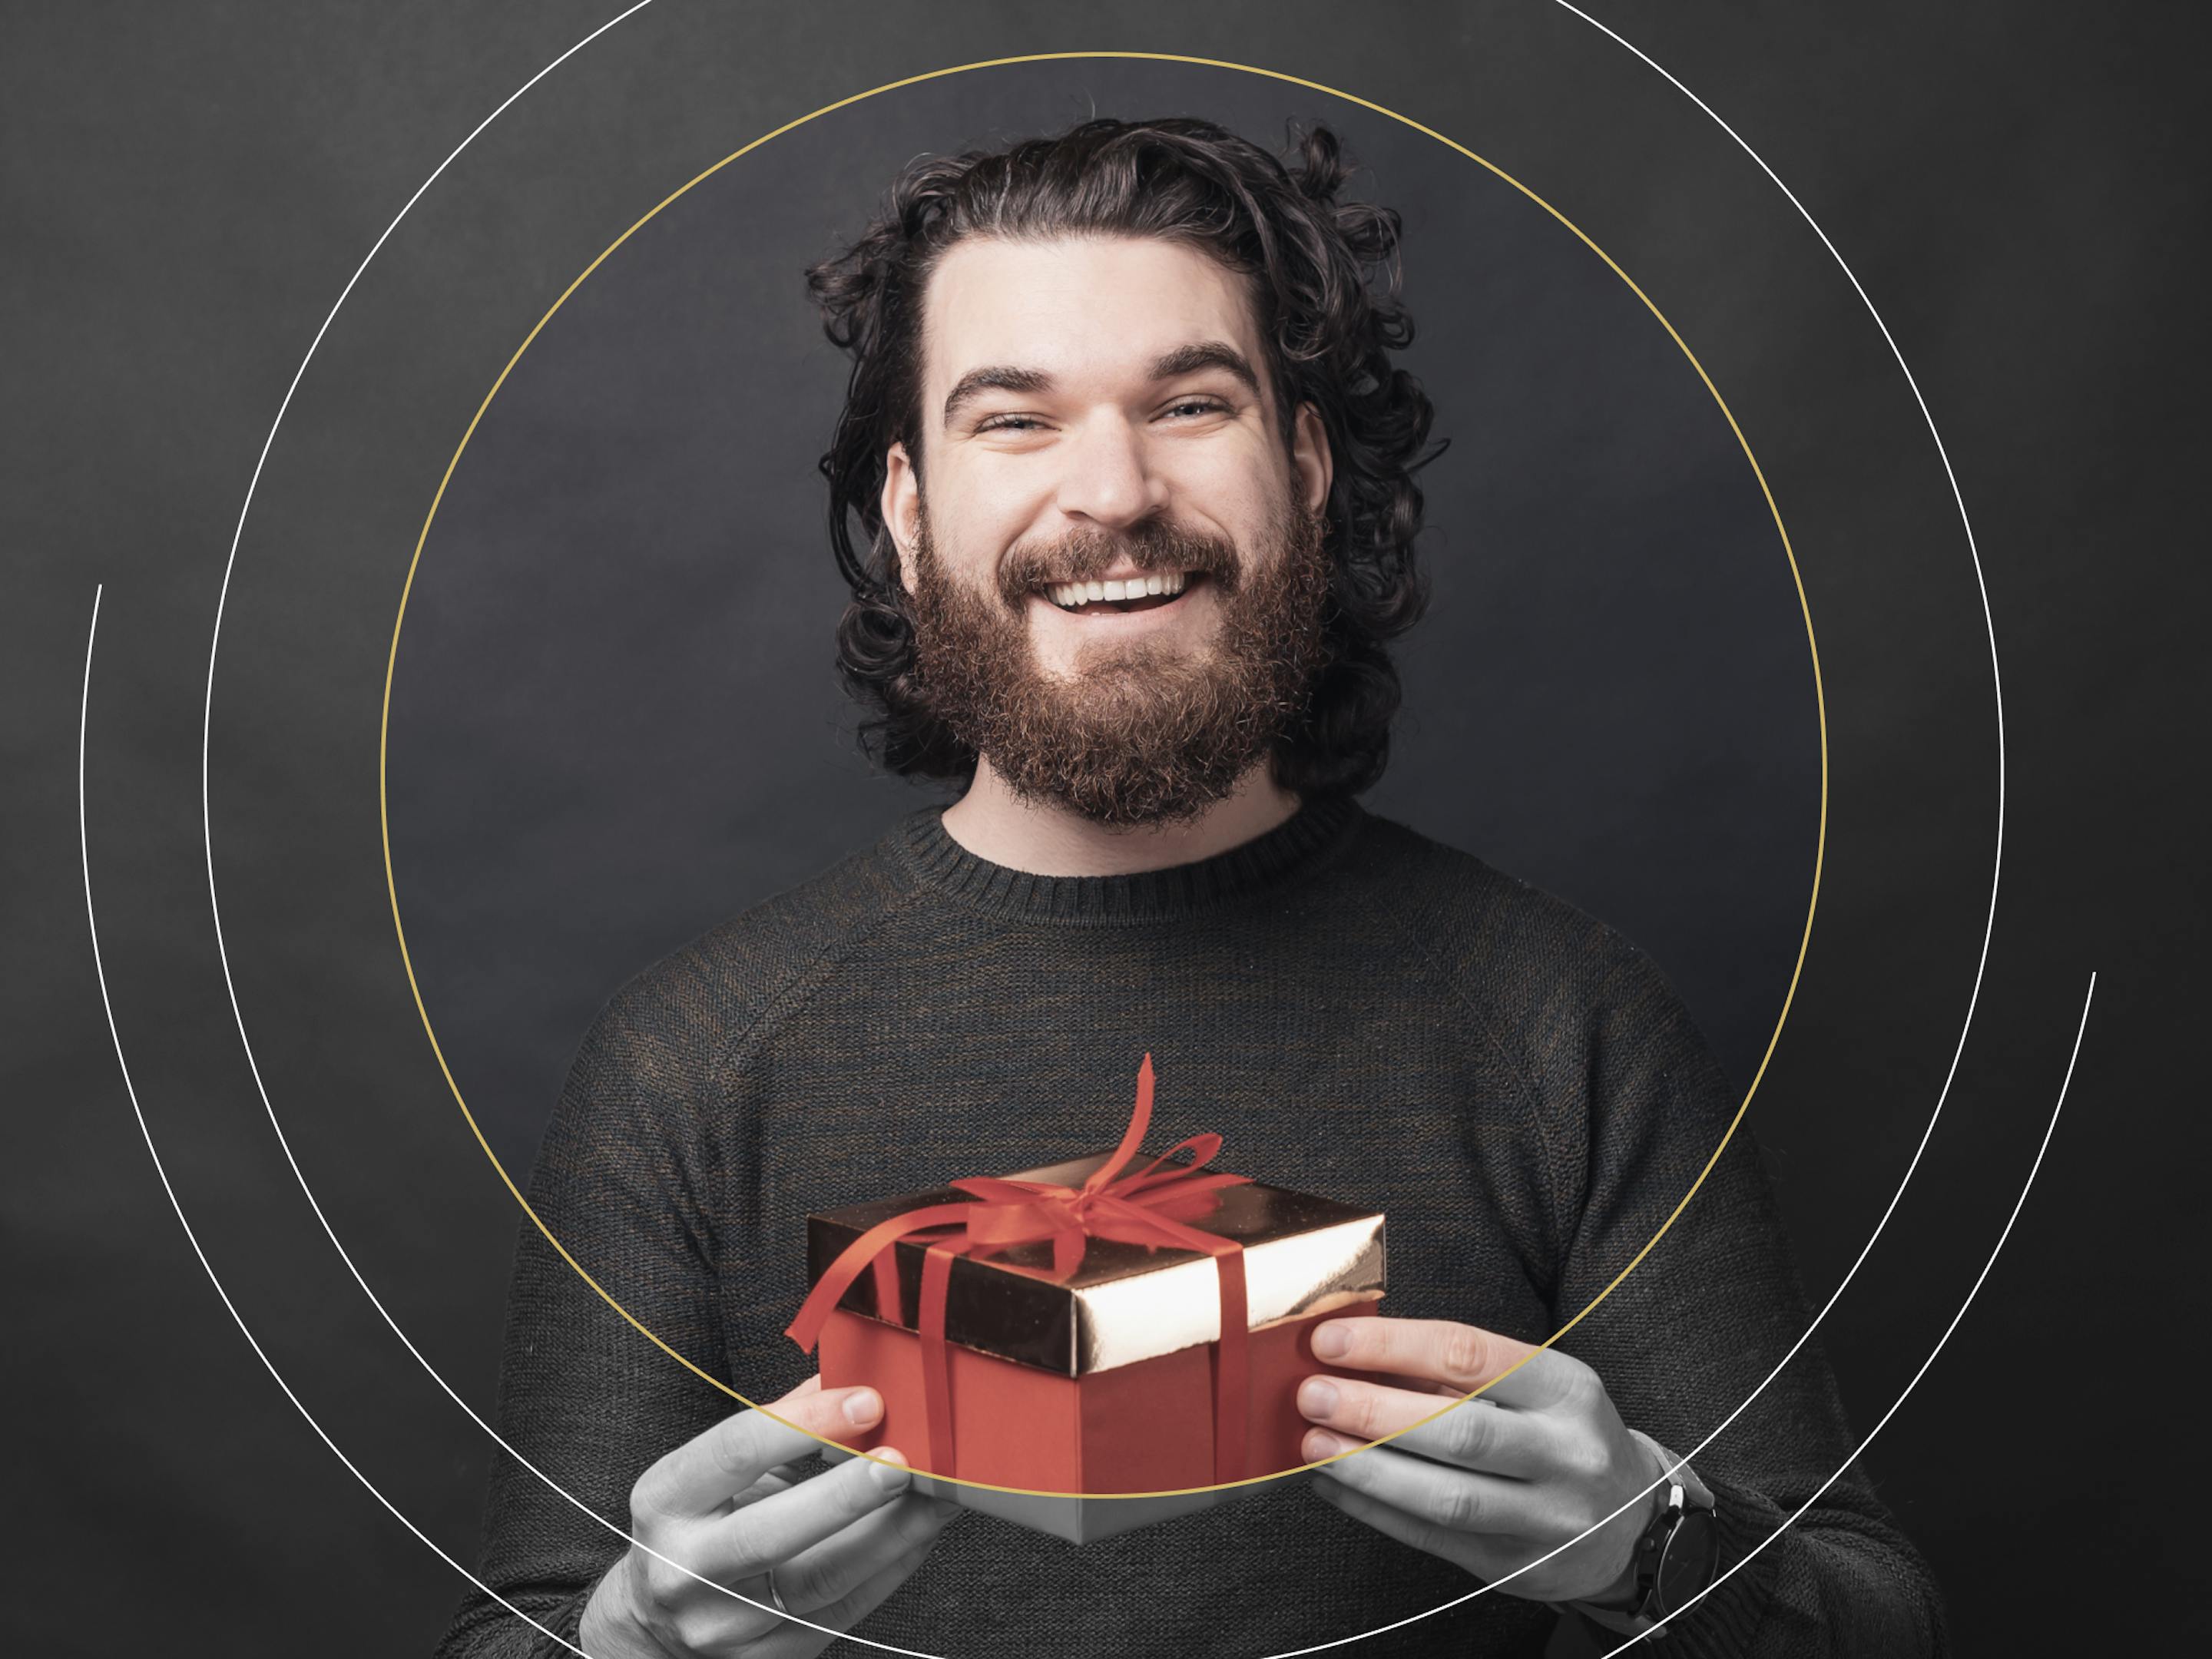 man smiling and holding red gift box